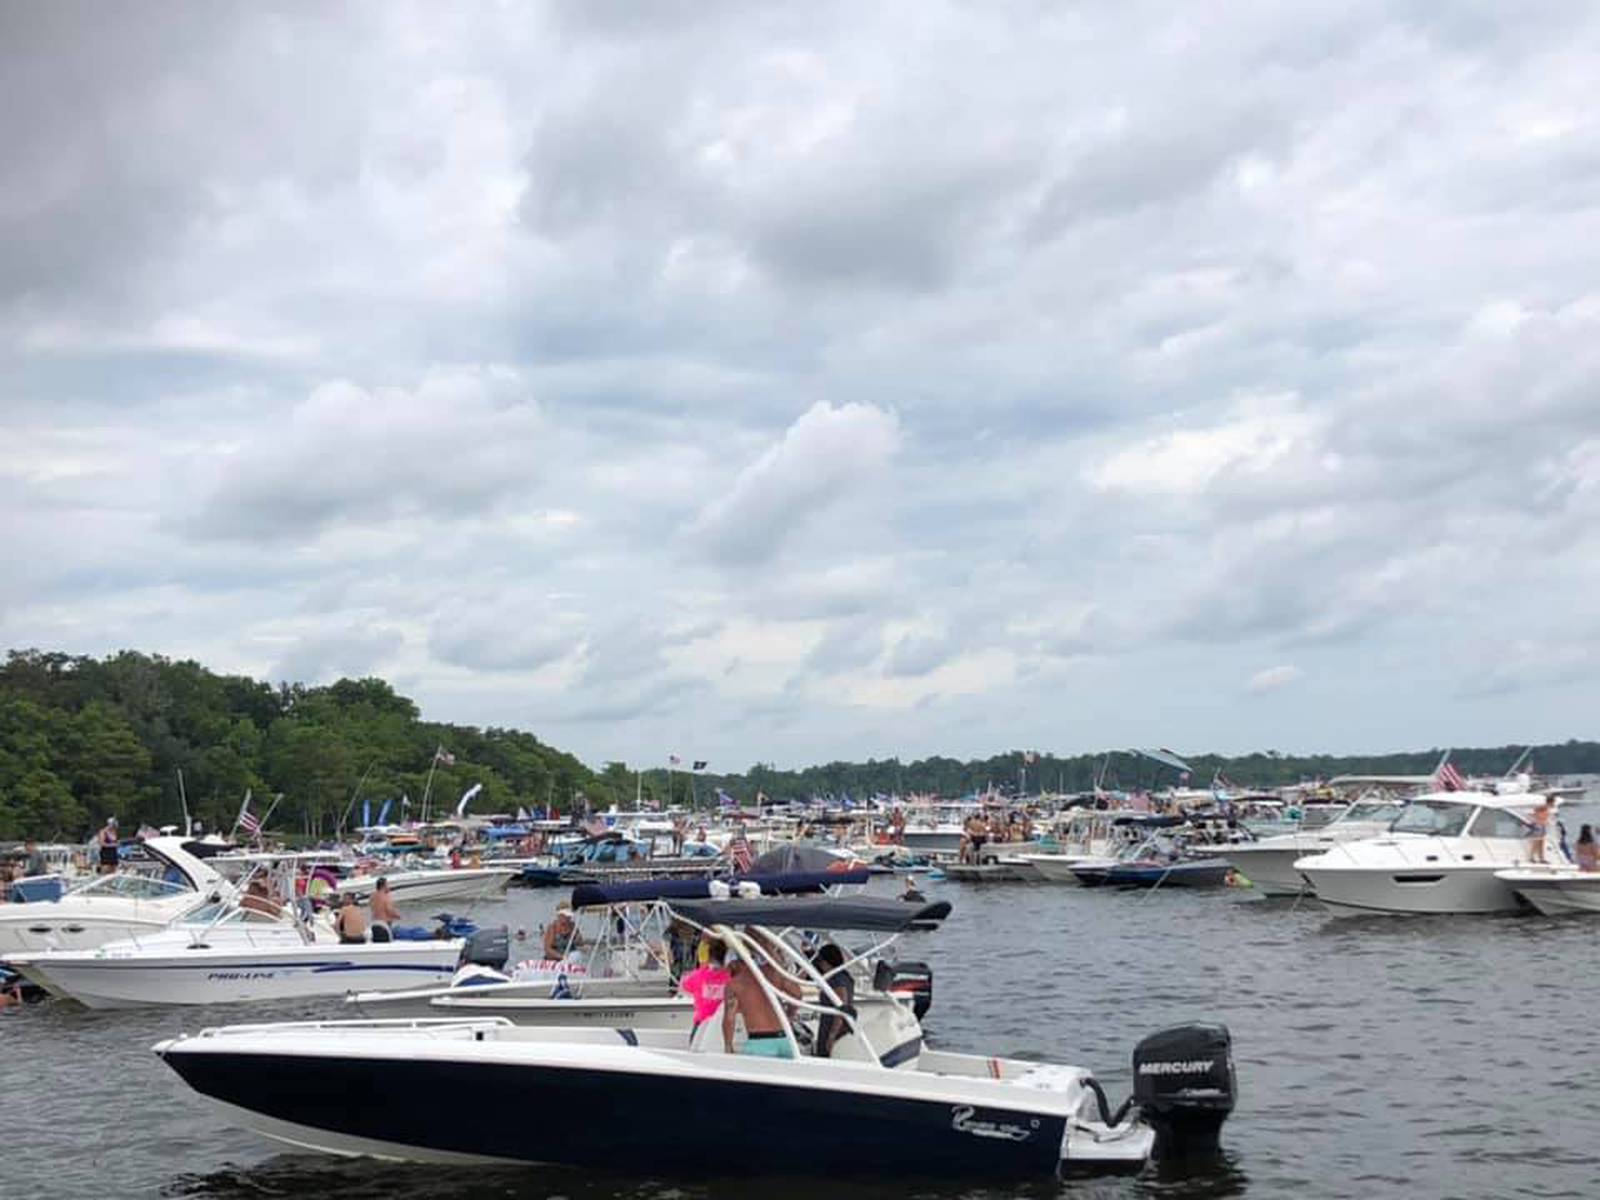 Clay County Sheriff’s Office estimates between 200300 boaters showed